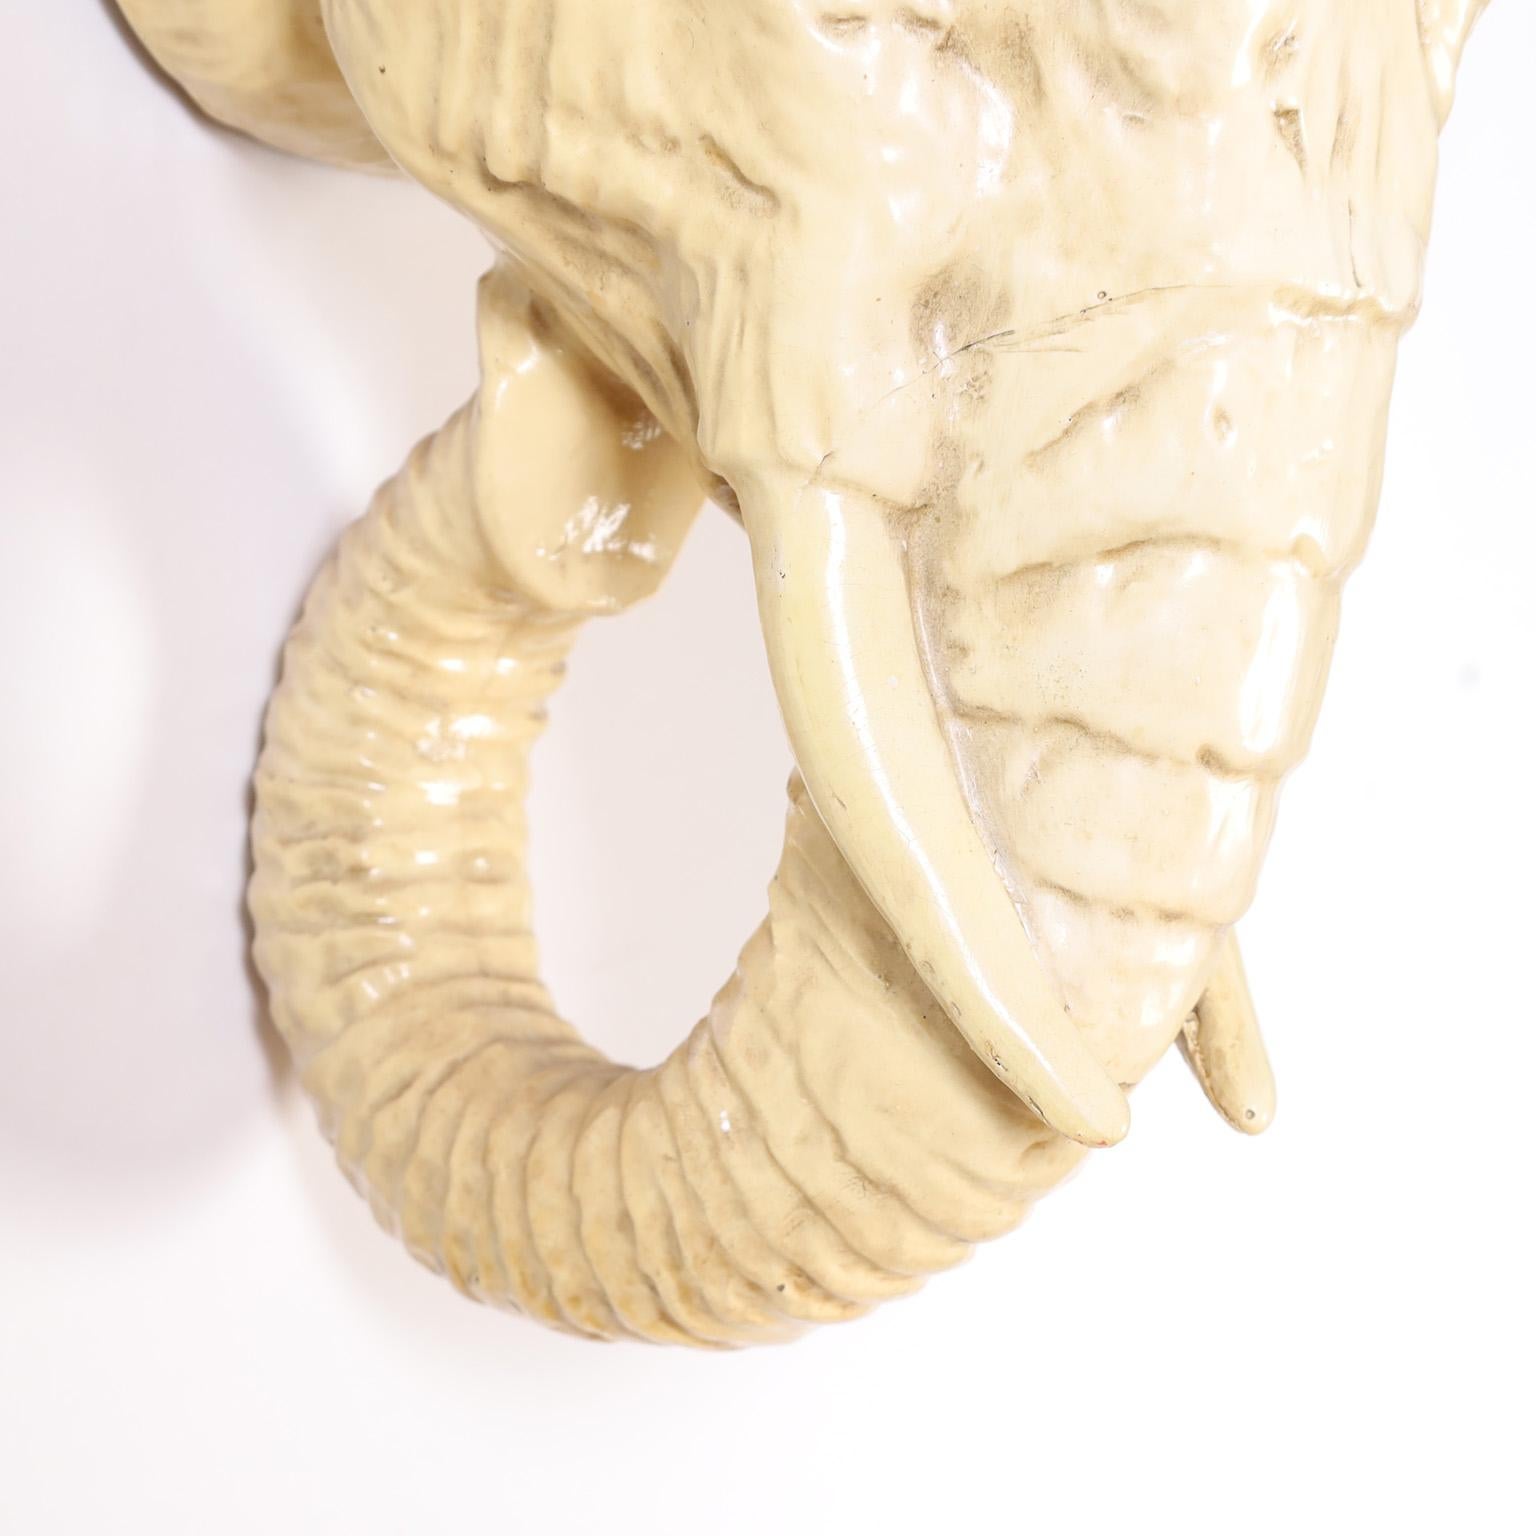 Enameled Painted Elephant Head Wall Sculpture For Sale